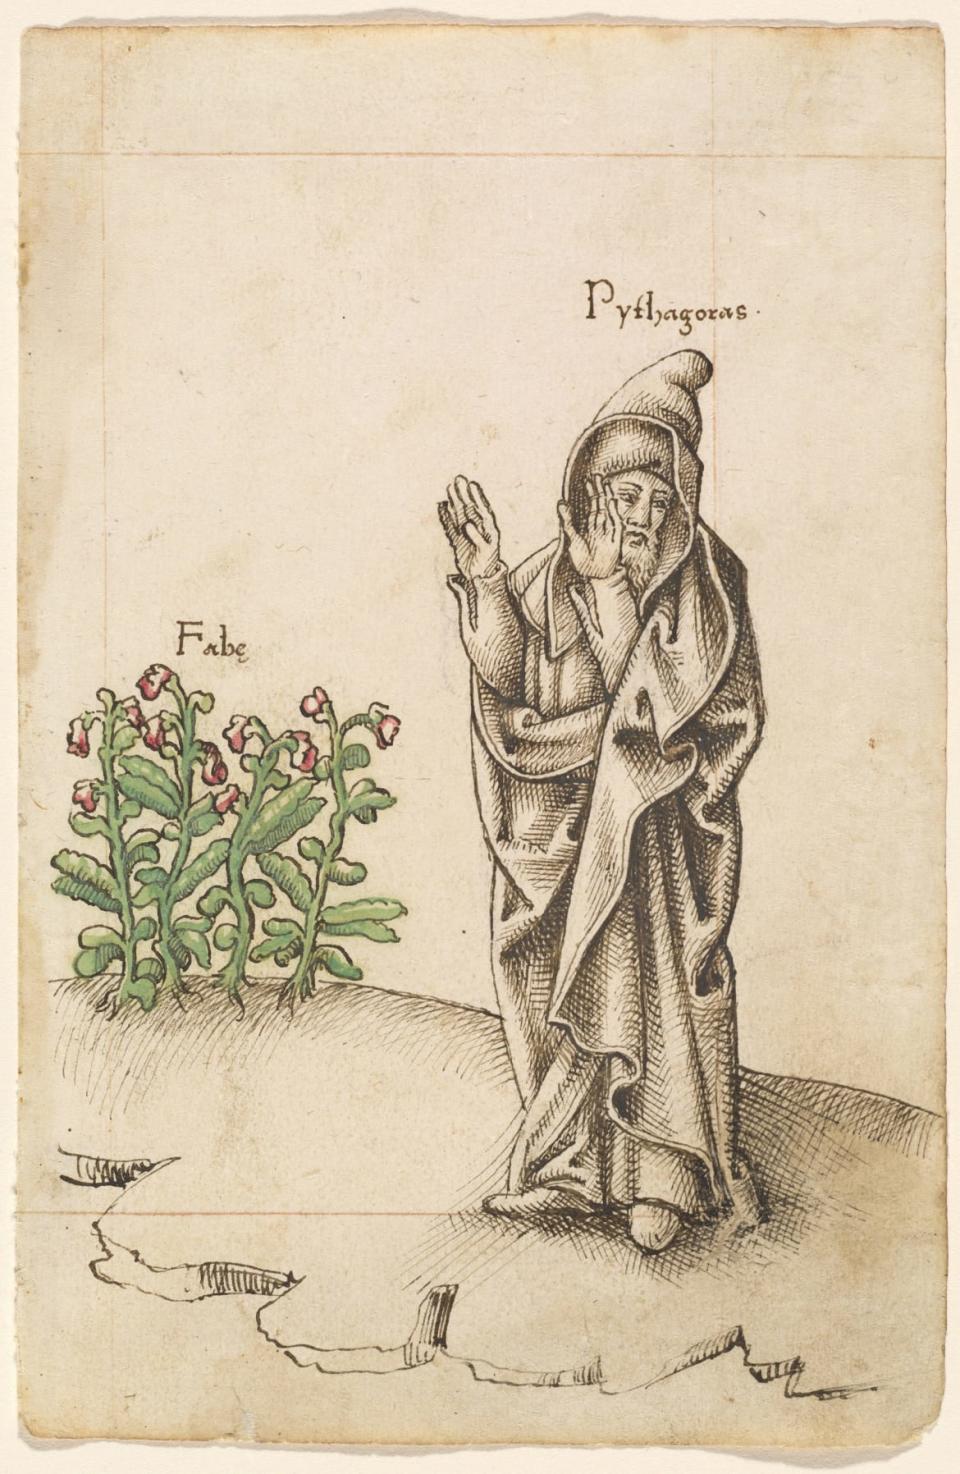 <div class="inline-image__caption"><p>Pythagorus turning away from fava beans in a French manuscript from the early 1500s</p></div> <div class="inline-image__credit">Public Domain</div>